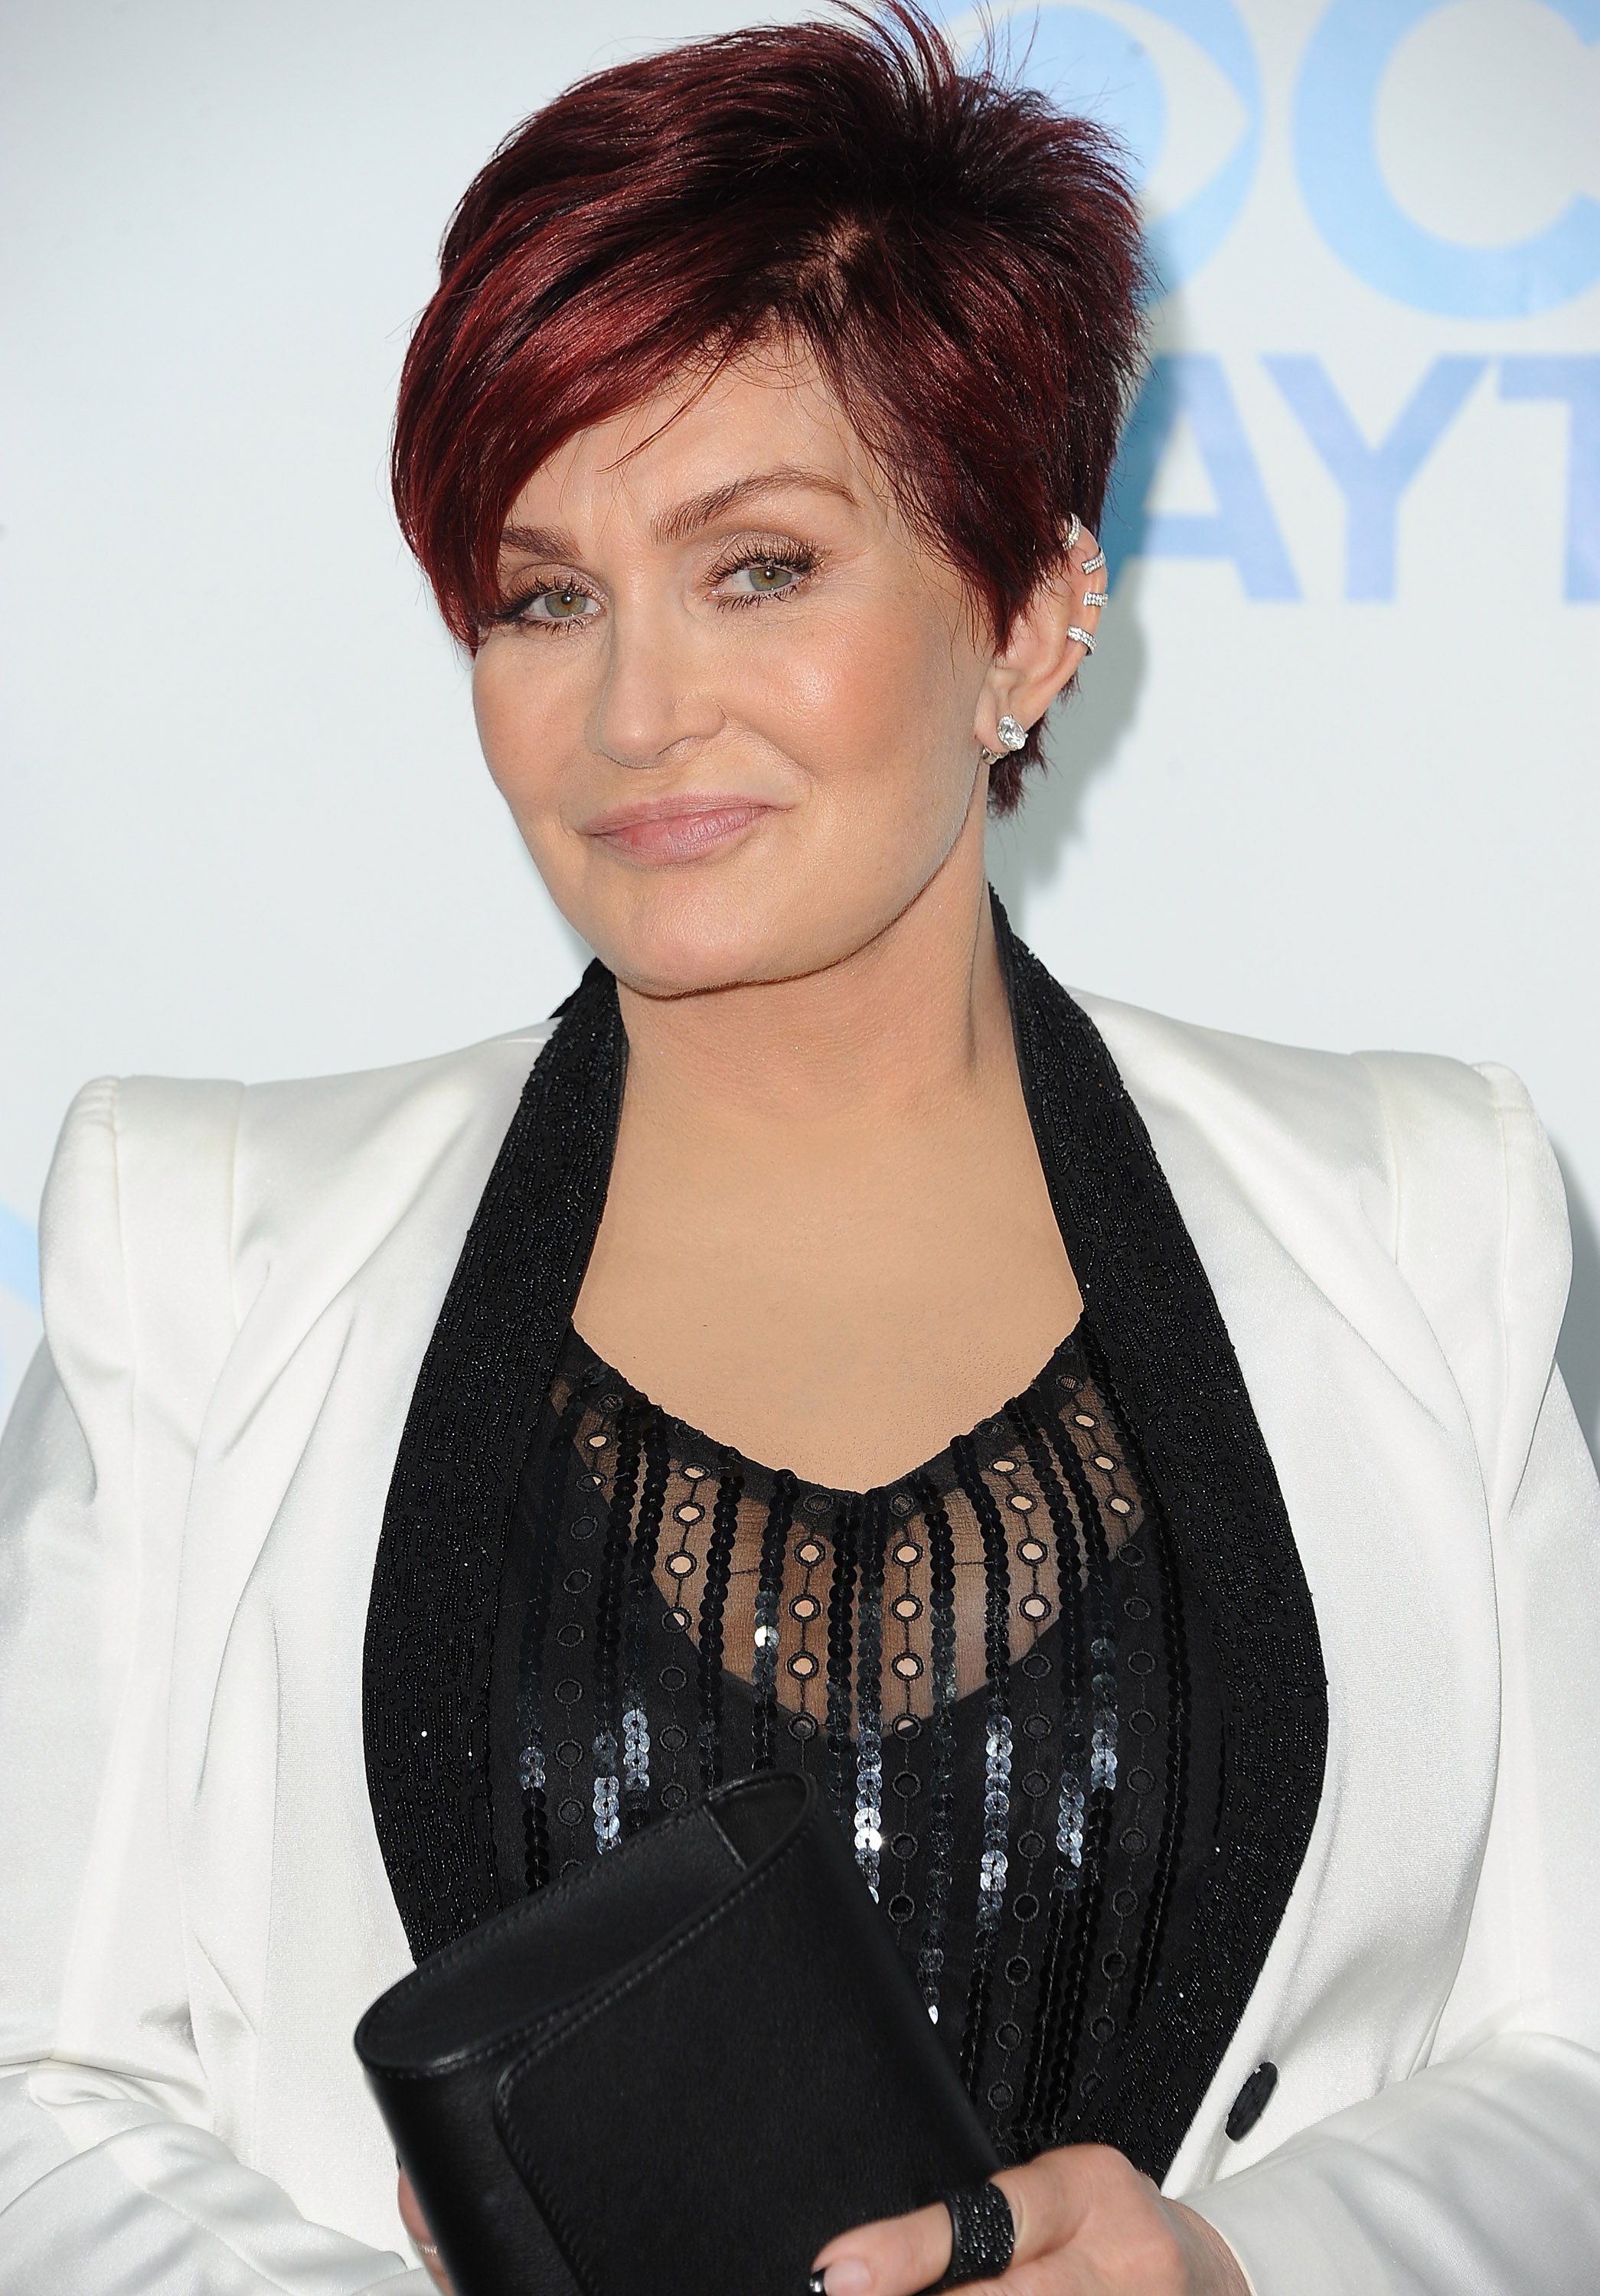 Sharon Osbourne pictured at the 41st Annual Daytime Emmy Awards CBS, 2014, Beverly Hills. | Photo: Getty Images